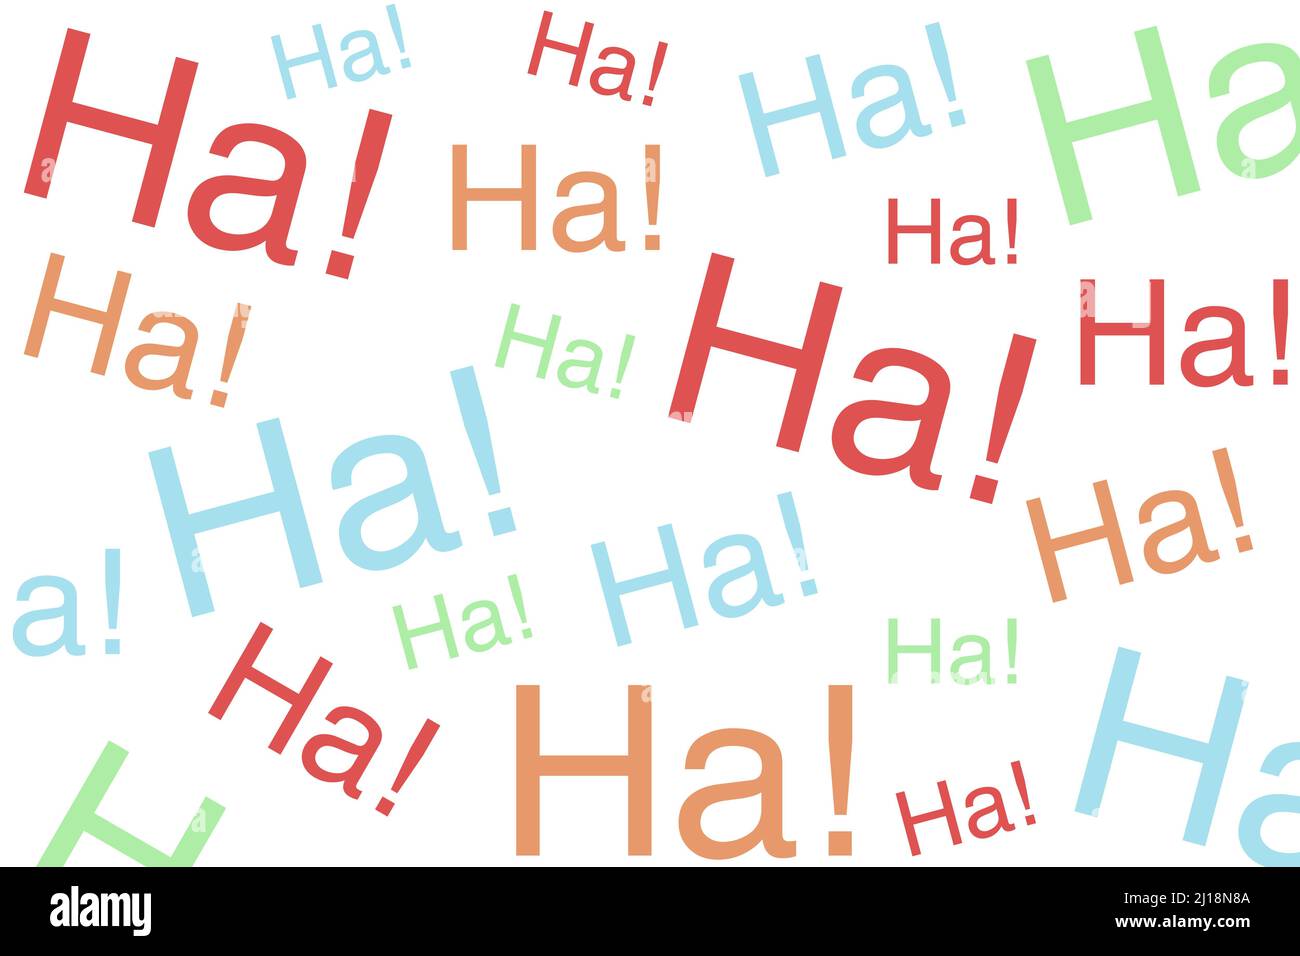 Haha laugh pattern. Funny jokes poster background.